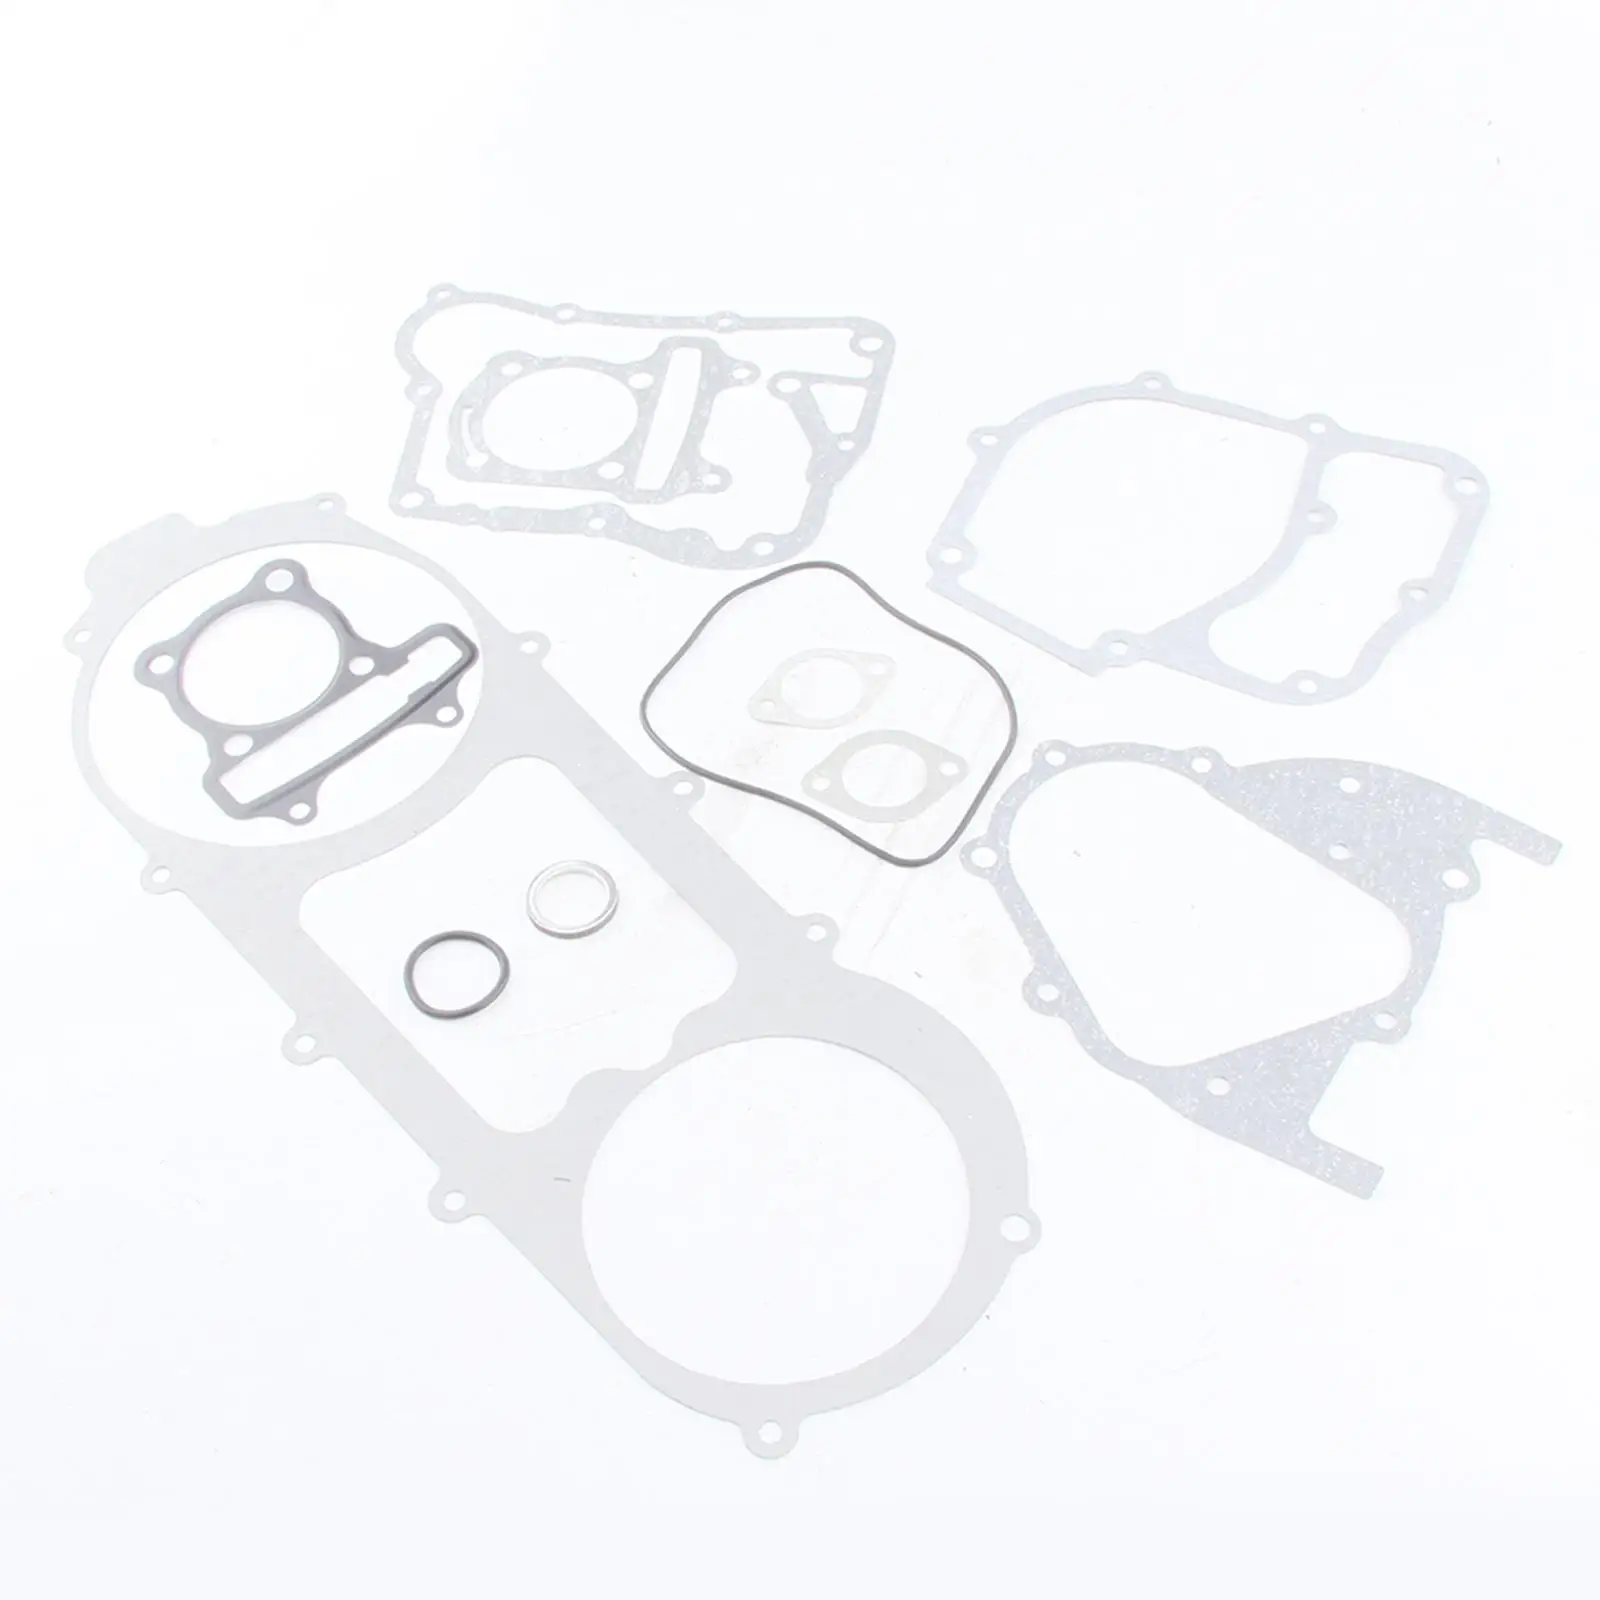  Set of Engine Head Gaskets for GY6 150 Karts Quad Mopeds, Quality